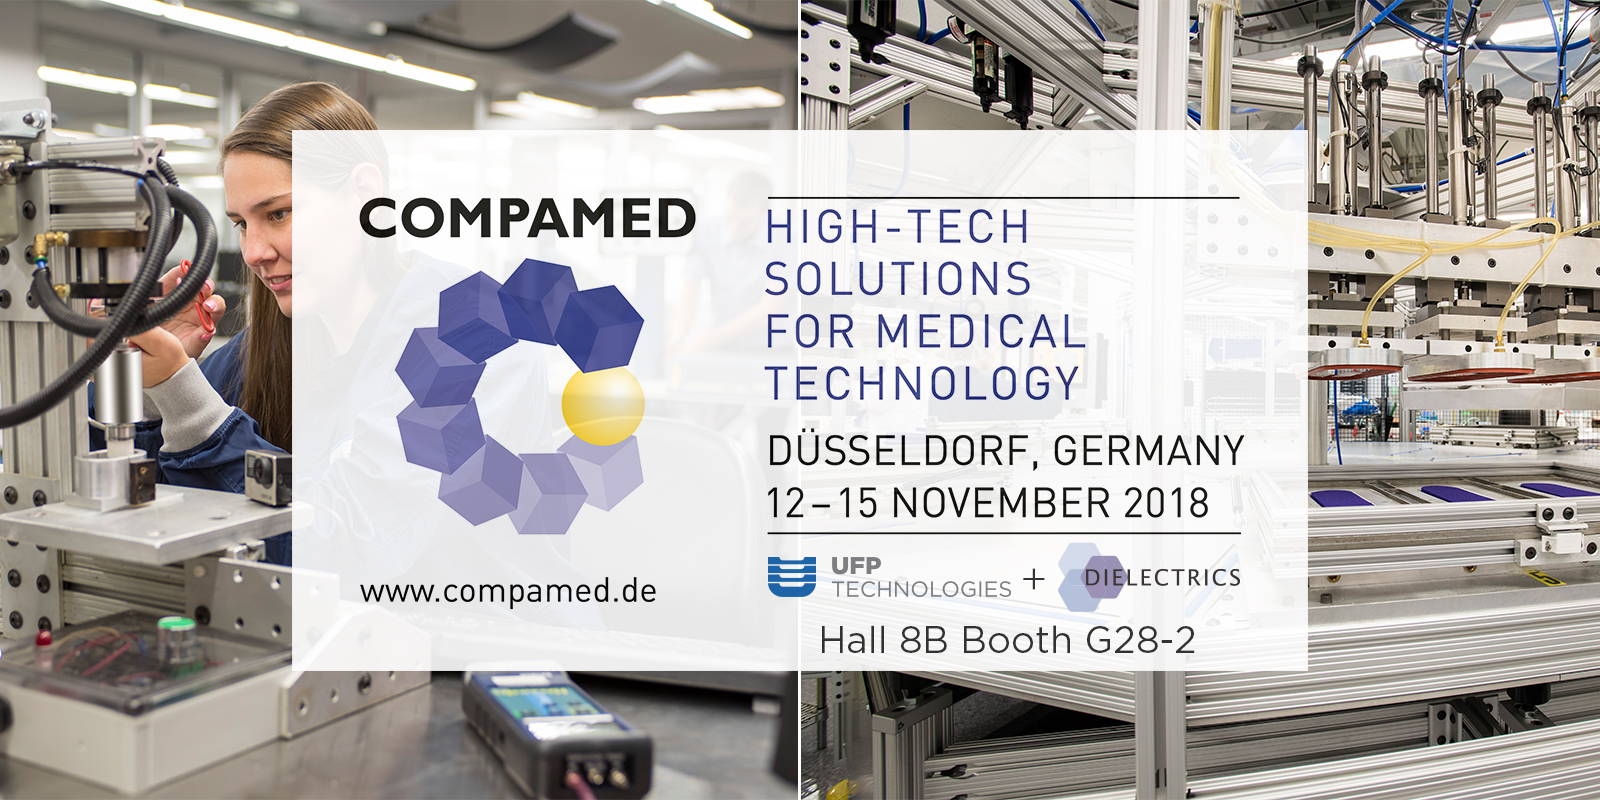 UFP Technologies exhibiting at Compamed 2018